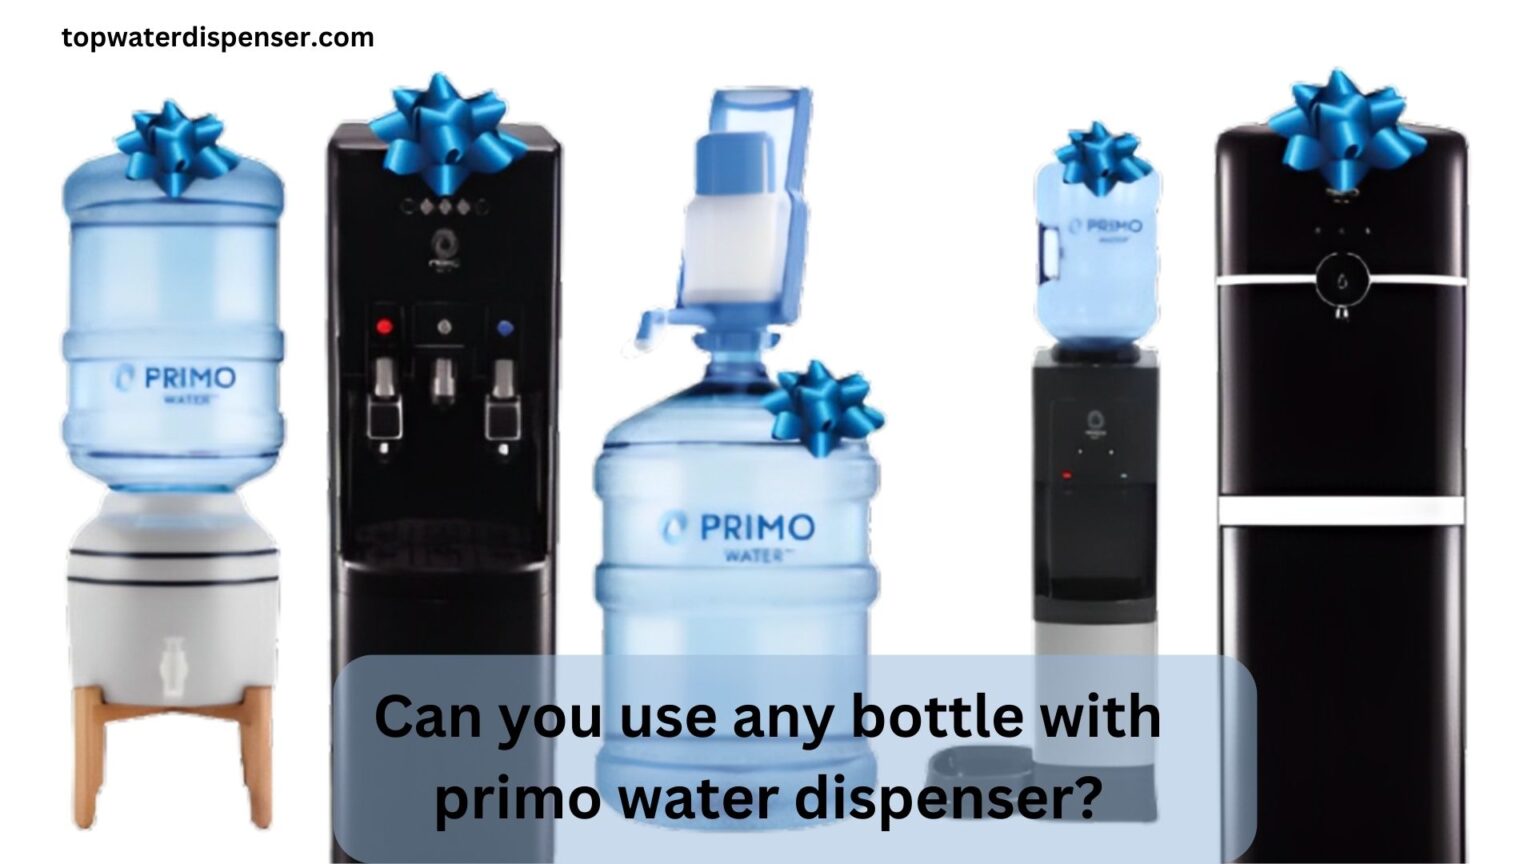 Can you use any bottle with primo water dispenser?